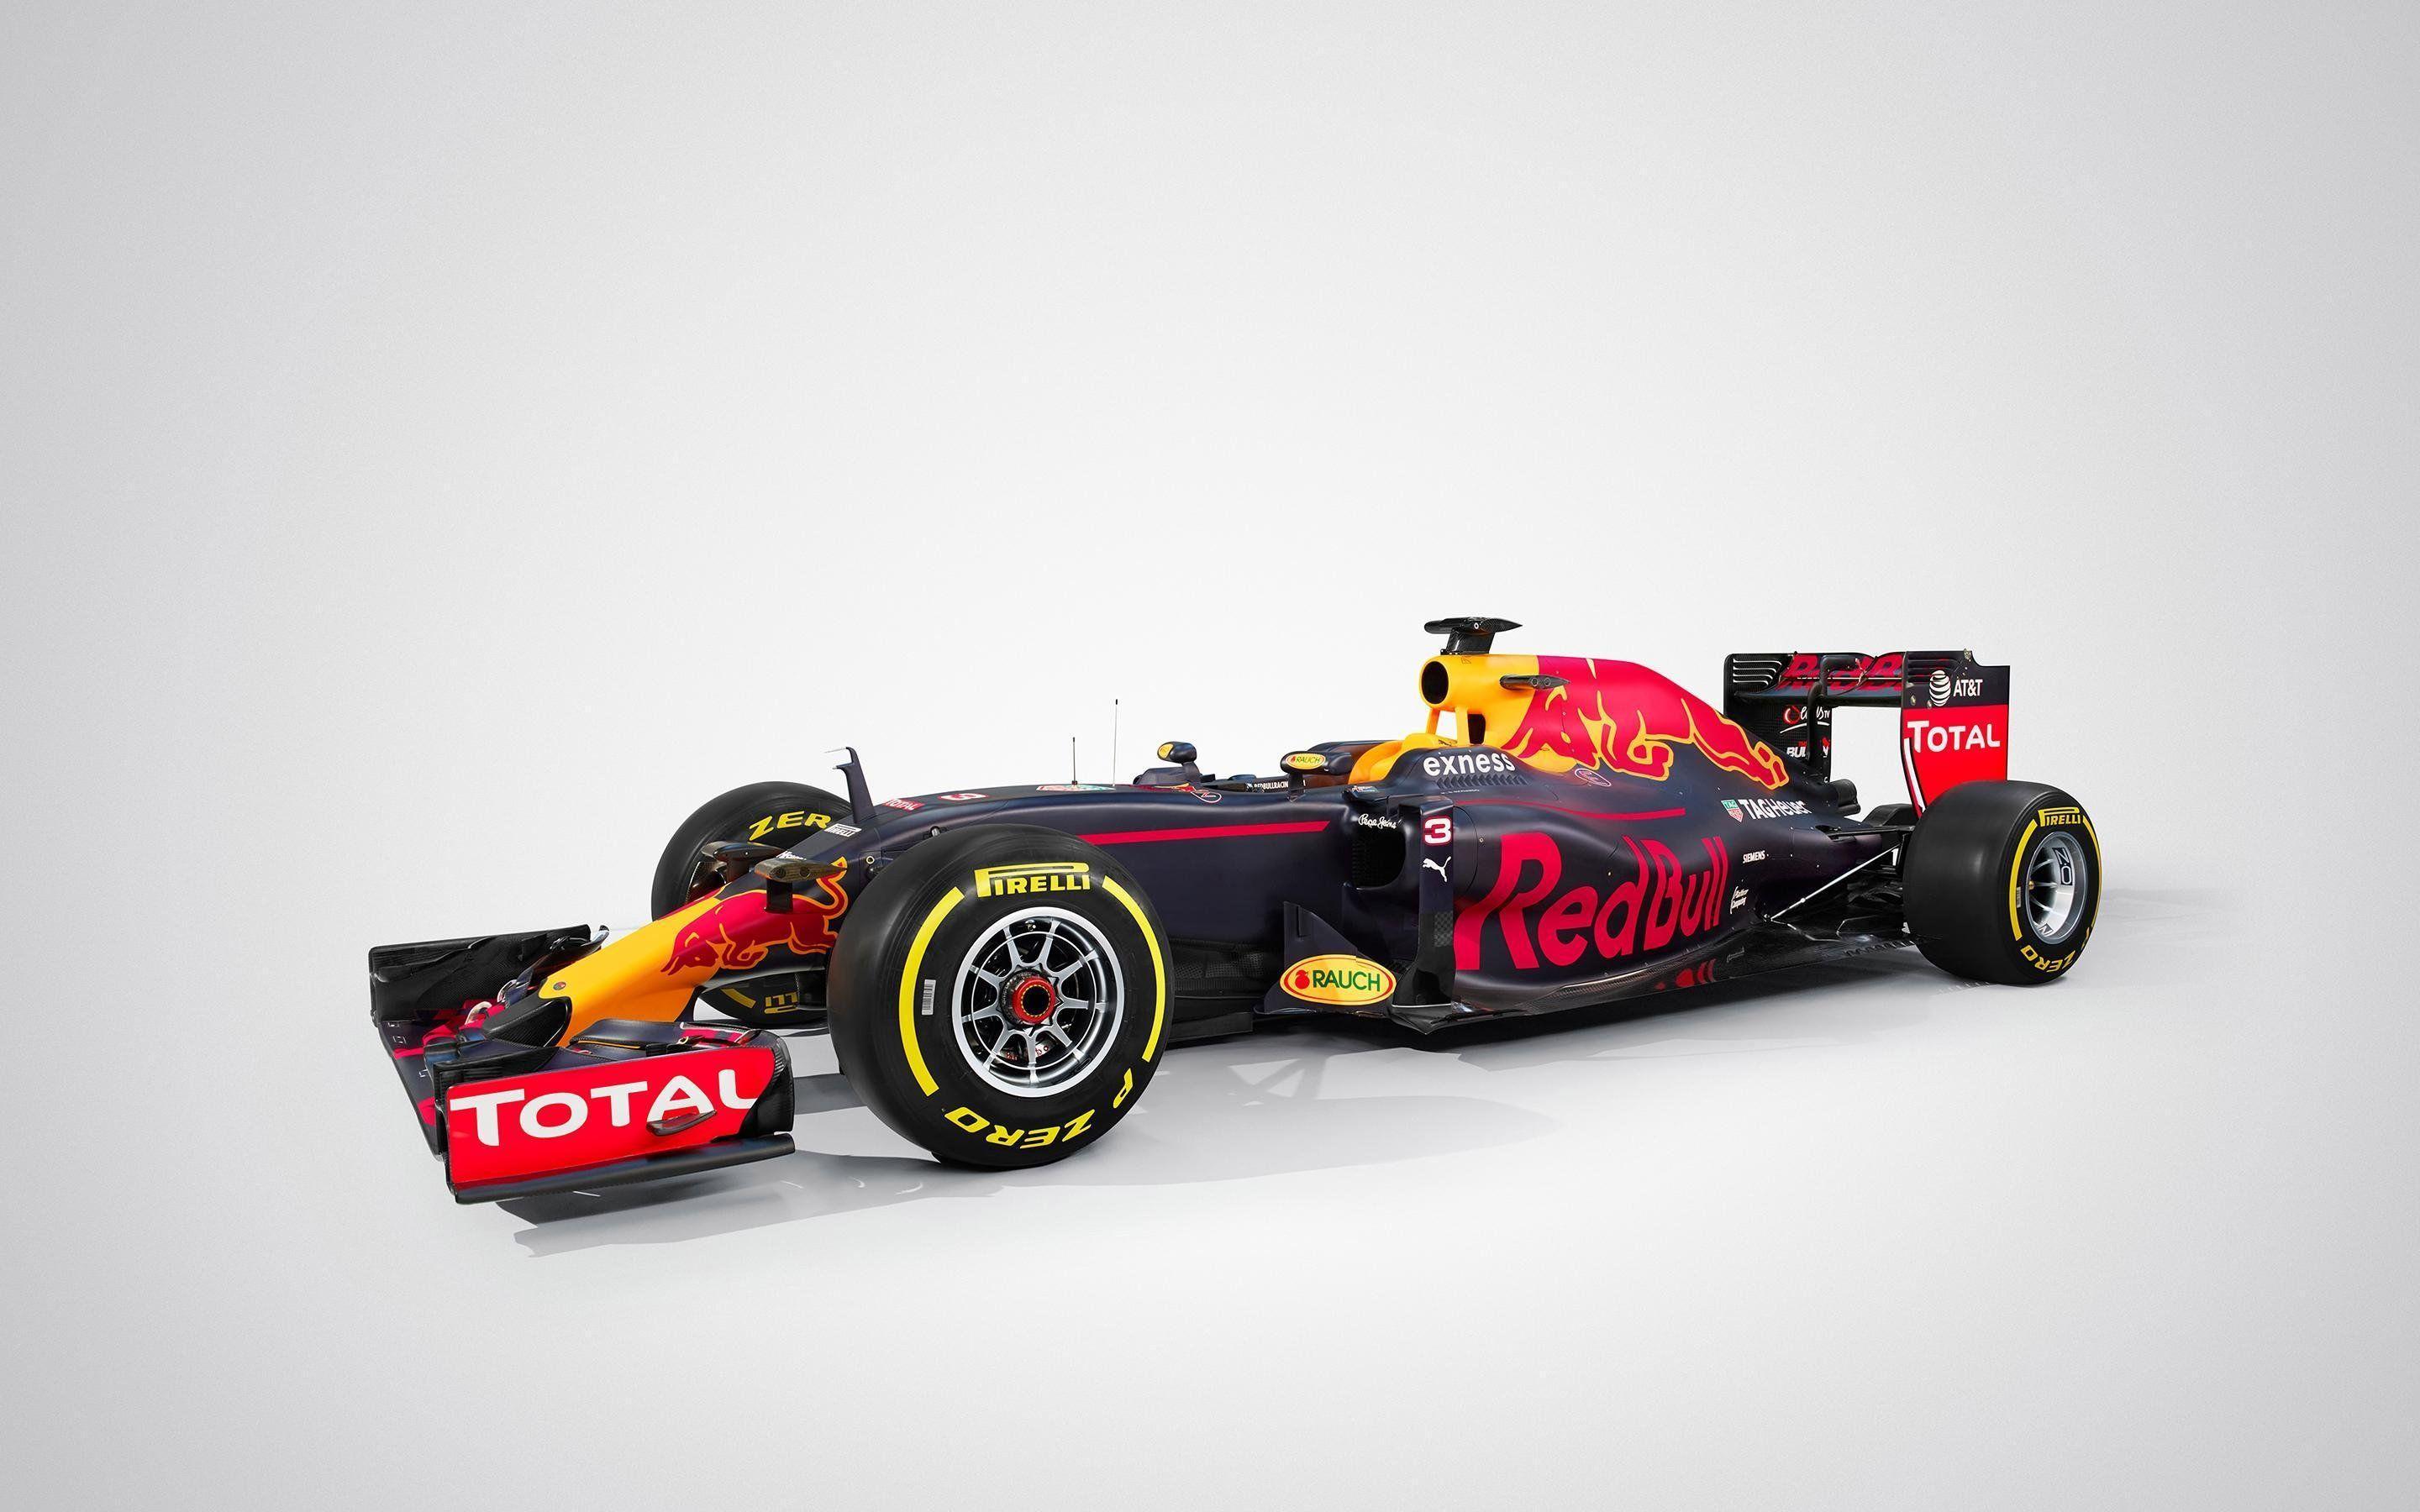 A better look at Red Bull Racing&;s RB12 livery. Scrutinize